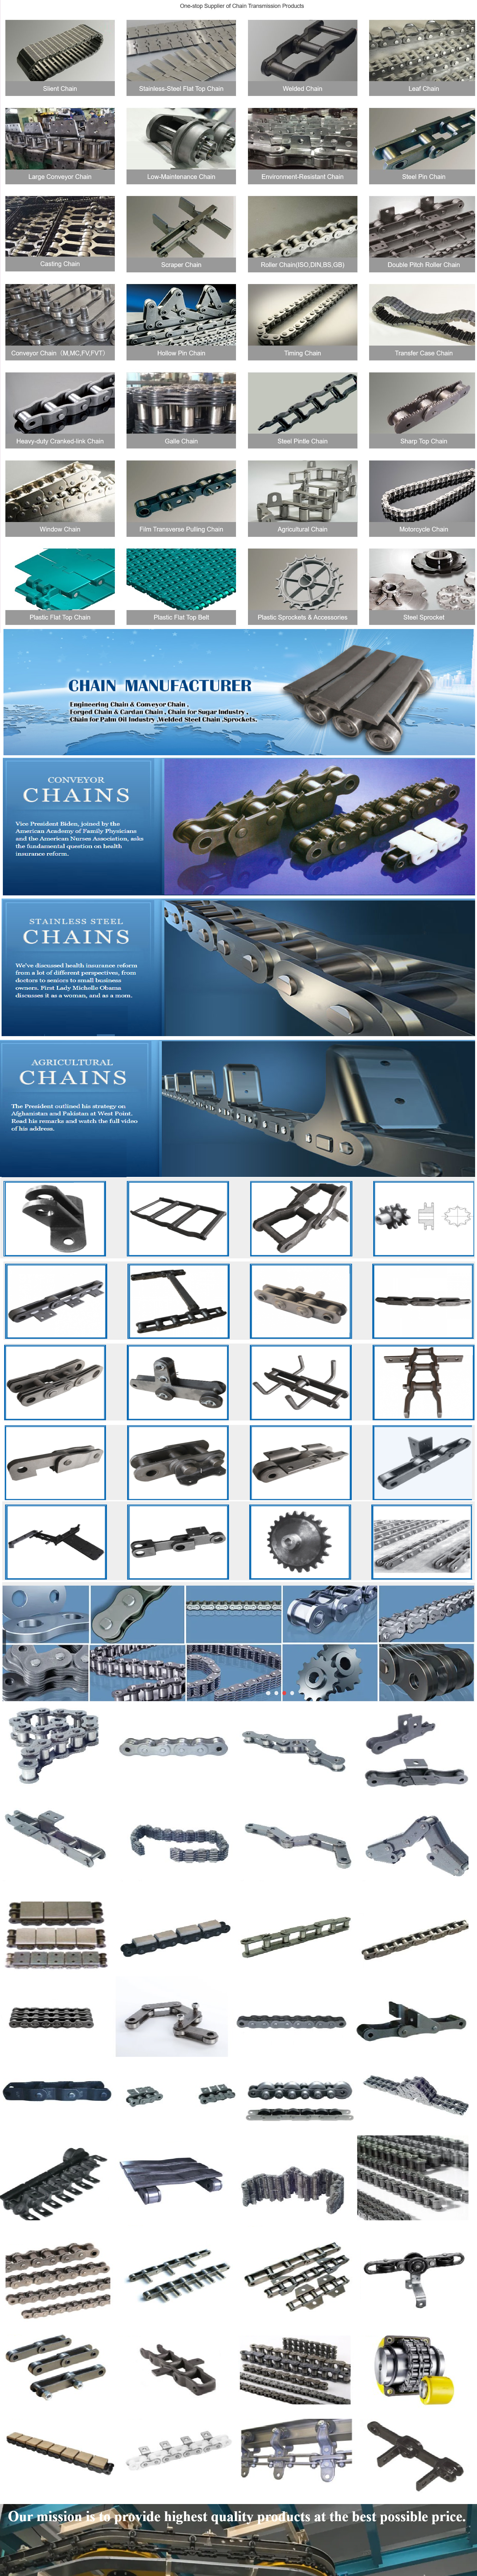 Best  made in China - replacement parts - pintle Chain & sprocket manufacturer : Rubber industry chain size China in Sao Jose dos Campos Brazil  Corrugated Sidewall Conveyor Belt for Roller Chain with ce certificate top quality low price